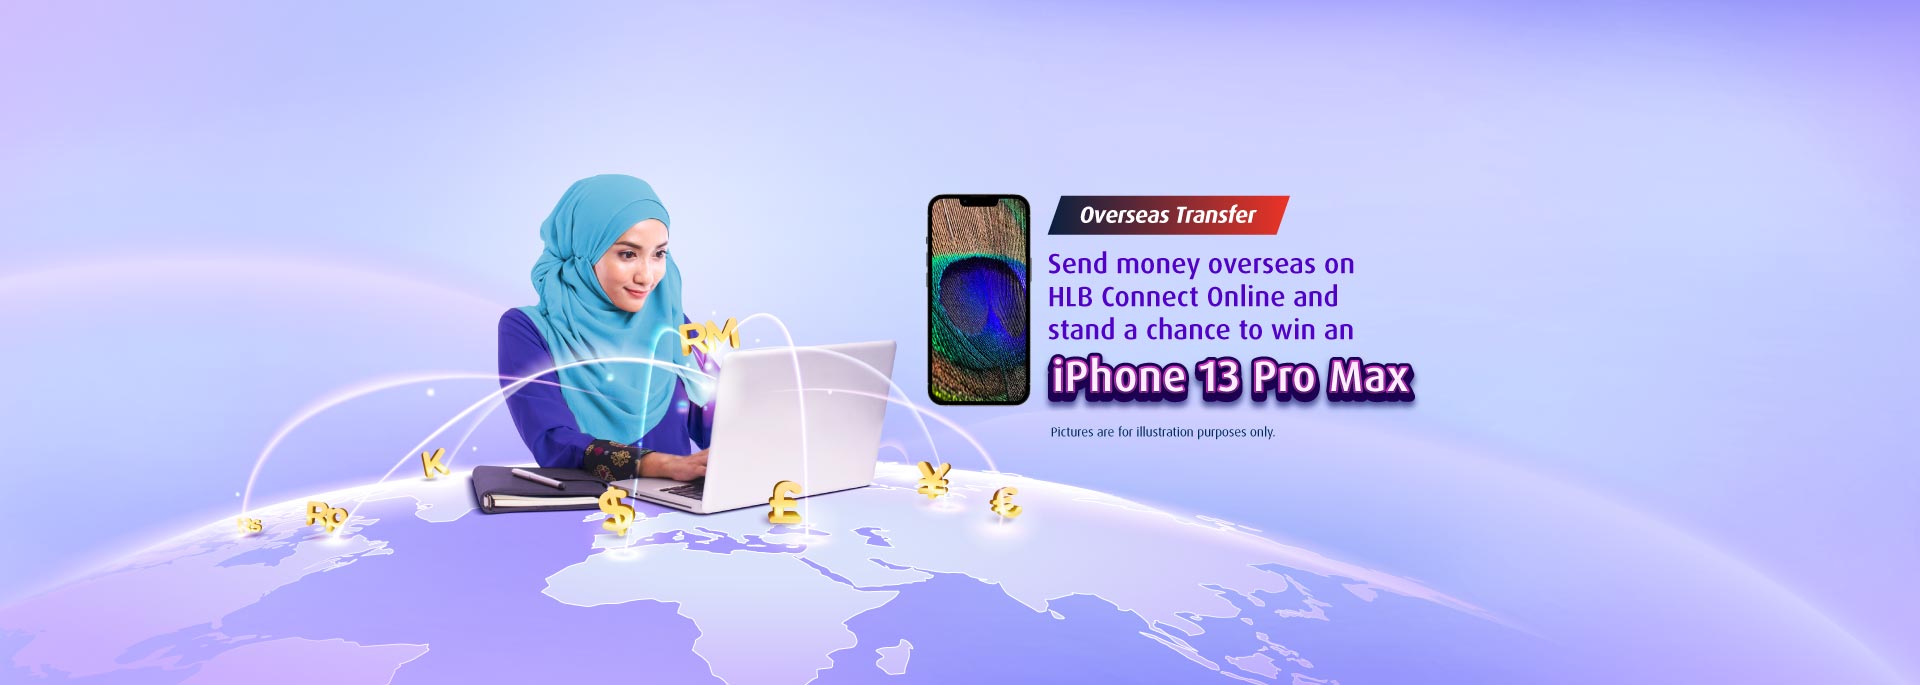 Send money overseas and stand to win an iPhone 13 Pro Max